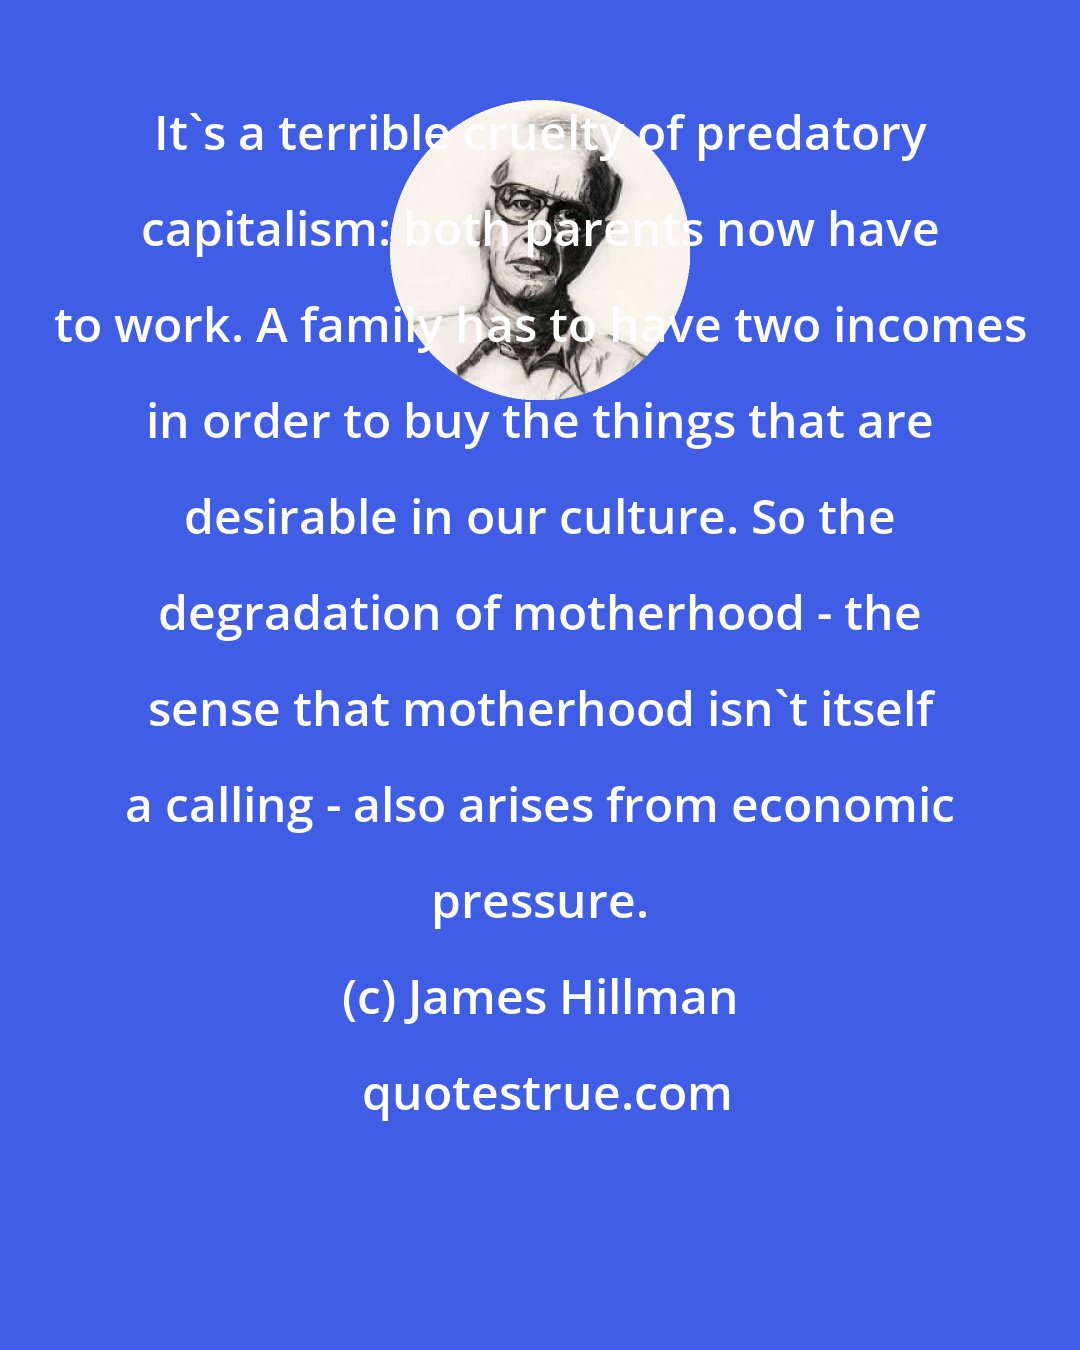 James Hillman: It's a terrible cruelty of predatory capitalism: both parents now have to work. A family has to have two incomes in order to buy the things that are desirable in our culture. So the degradation of motherhood - the sense that motherhood isn't itself a calling - also arises from economic pressure.